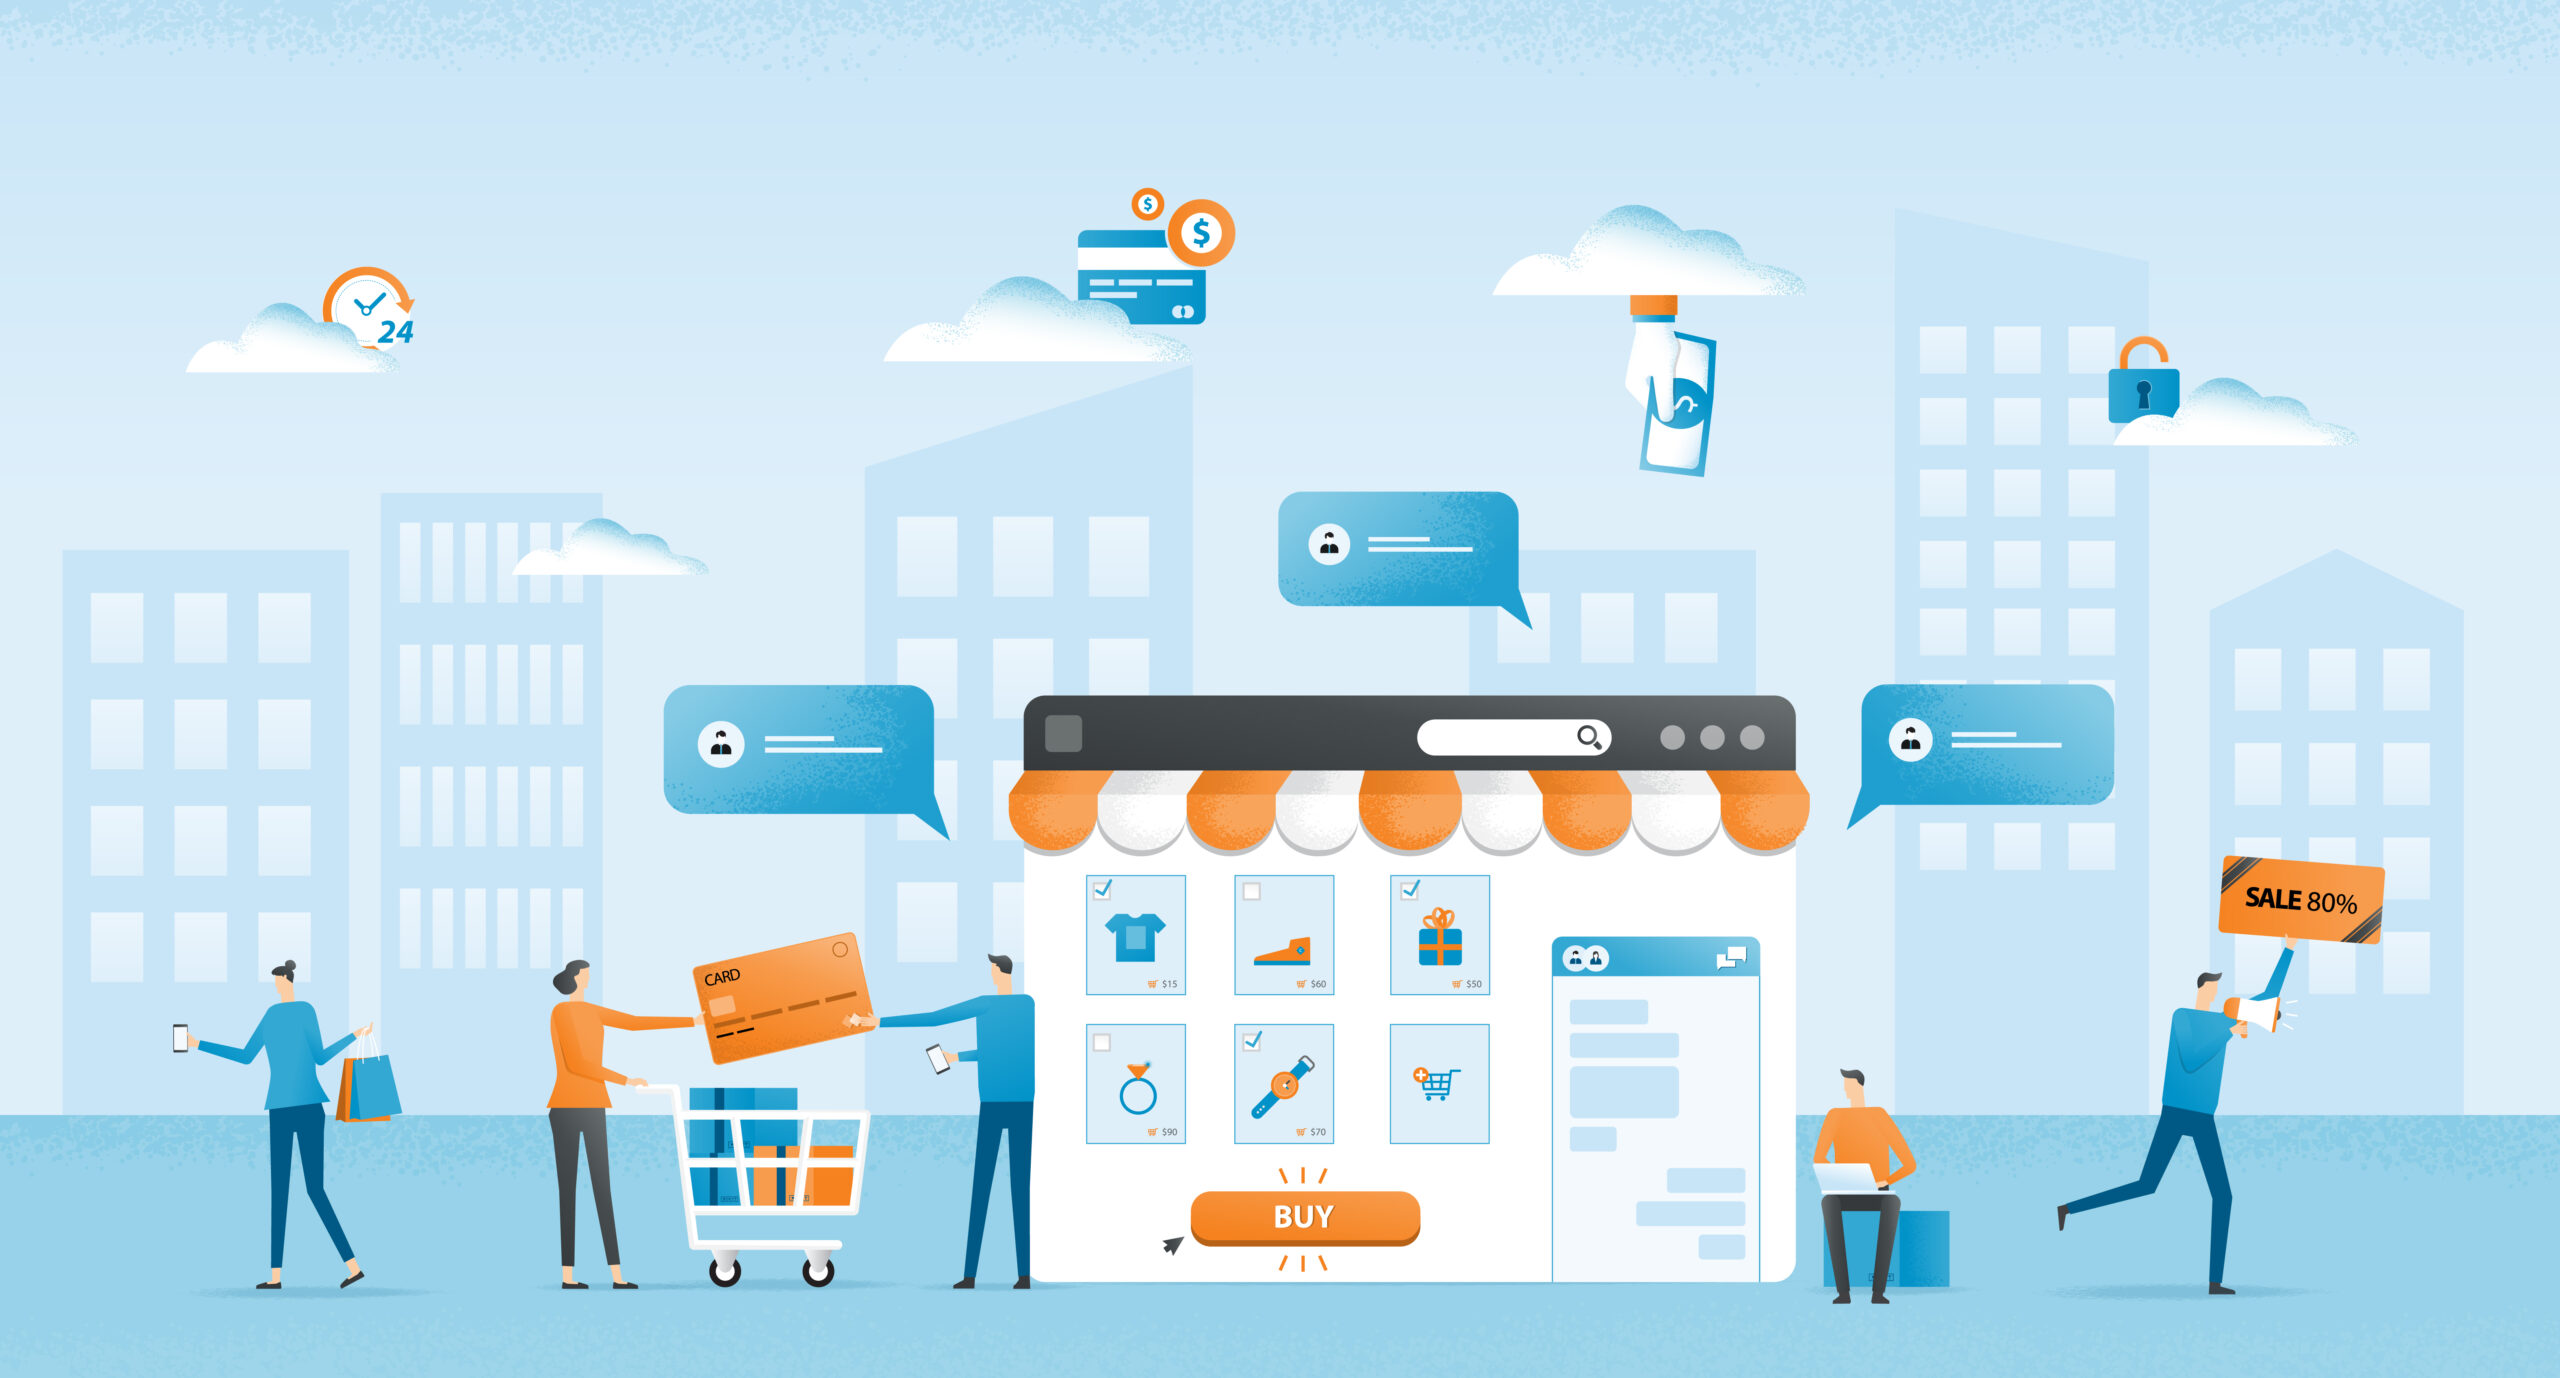 WooCommerce is one of the most popular eCommerce shopping carts, and at Helpbot, we are not limited to WooCommerce development services, and we skilled ourselves in WooCommerce SEO and search engine marketing. Most e-commerce sites fail to optimize their websites with best SEO practices. As a result, their potential customers will not be able to find them at the top of the Google search results. Our WP experts audit your e-commerce website and find out the points which should be worked upon to increase your visibility in search results.